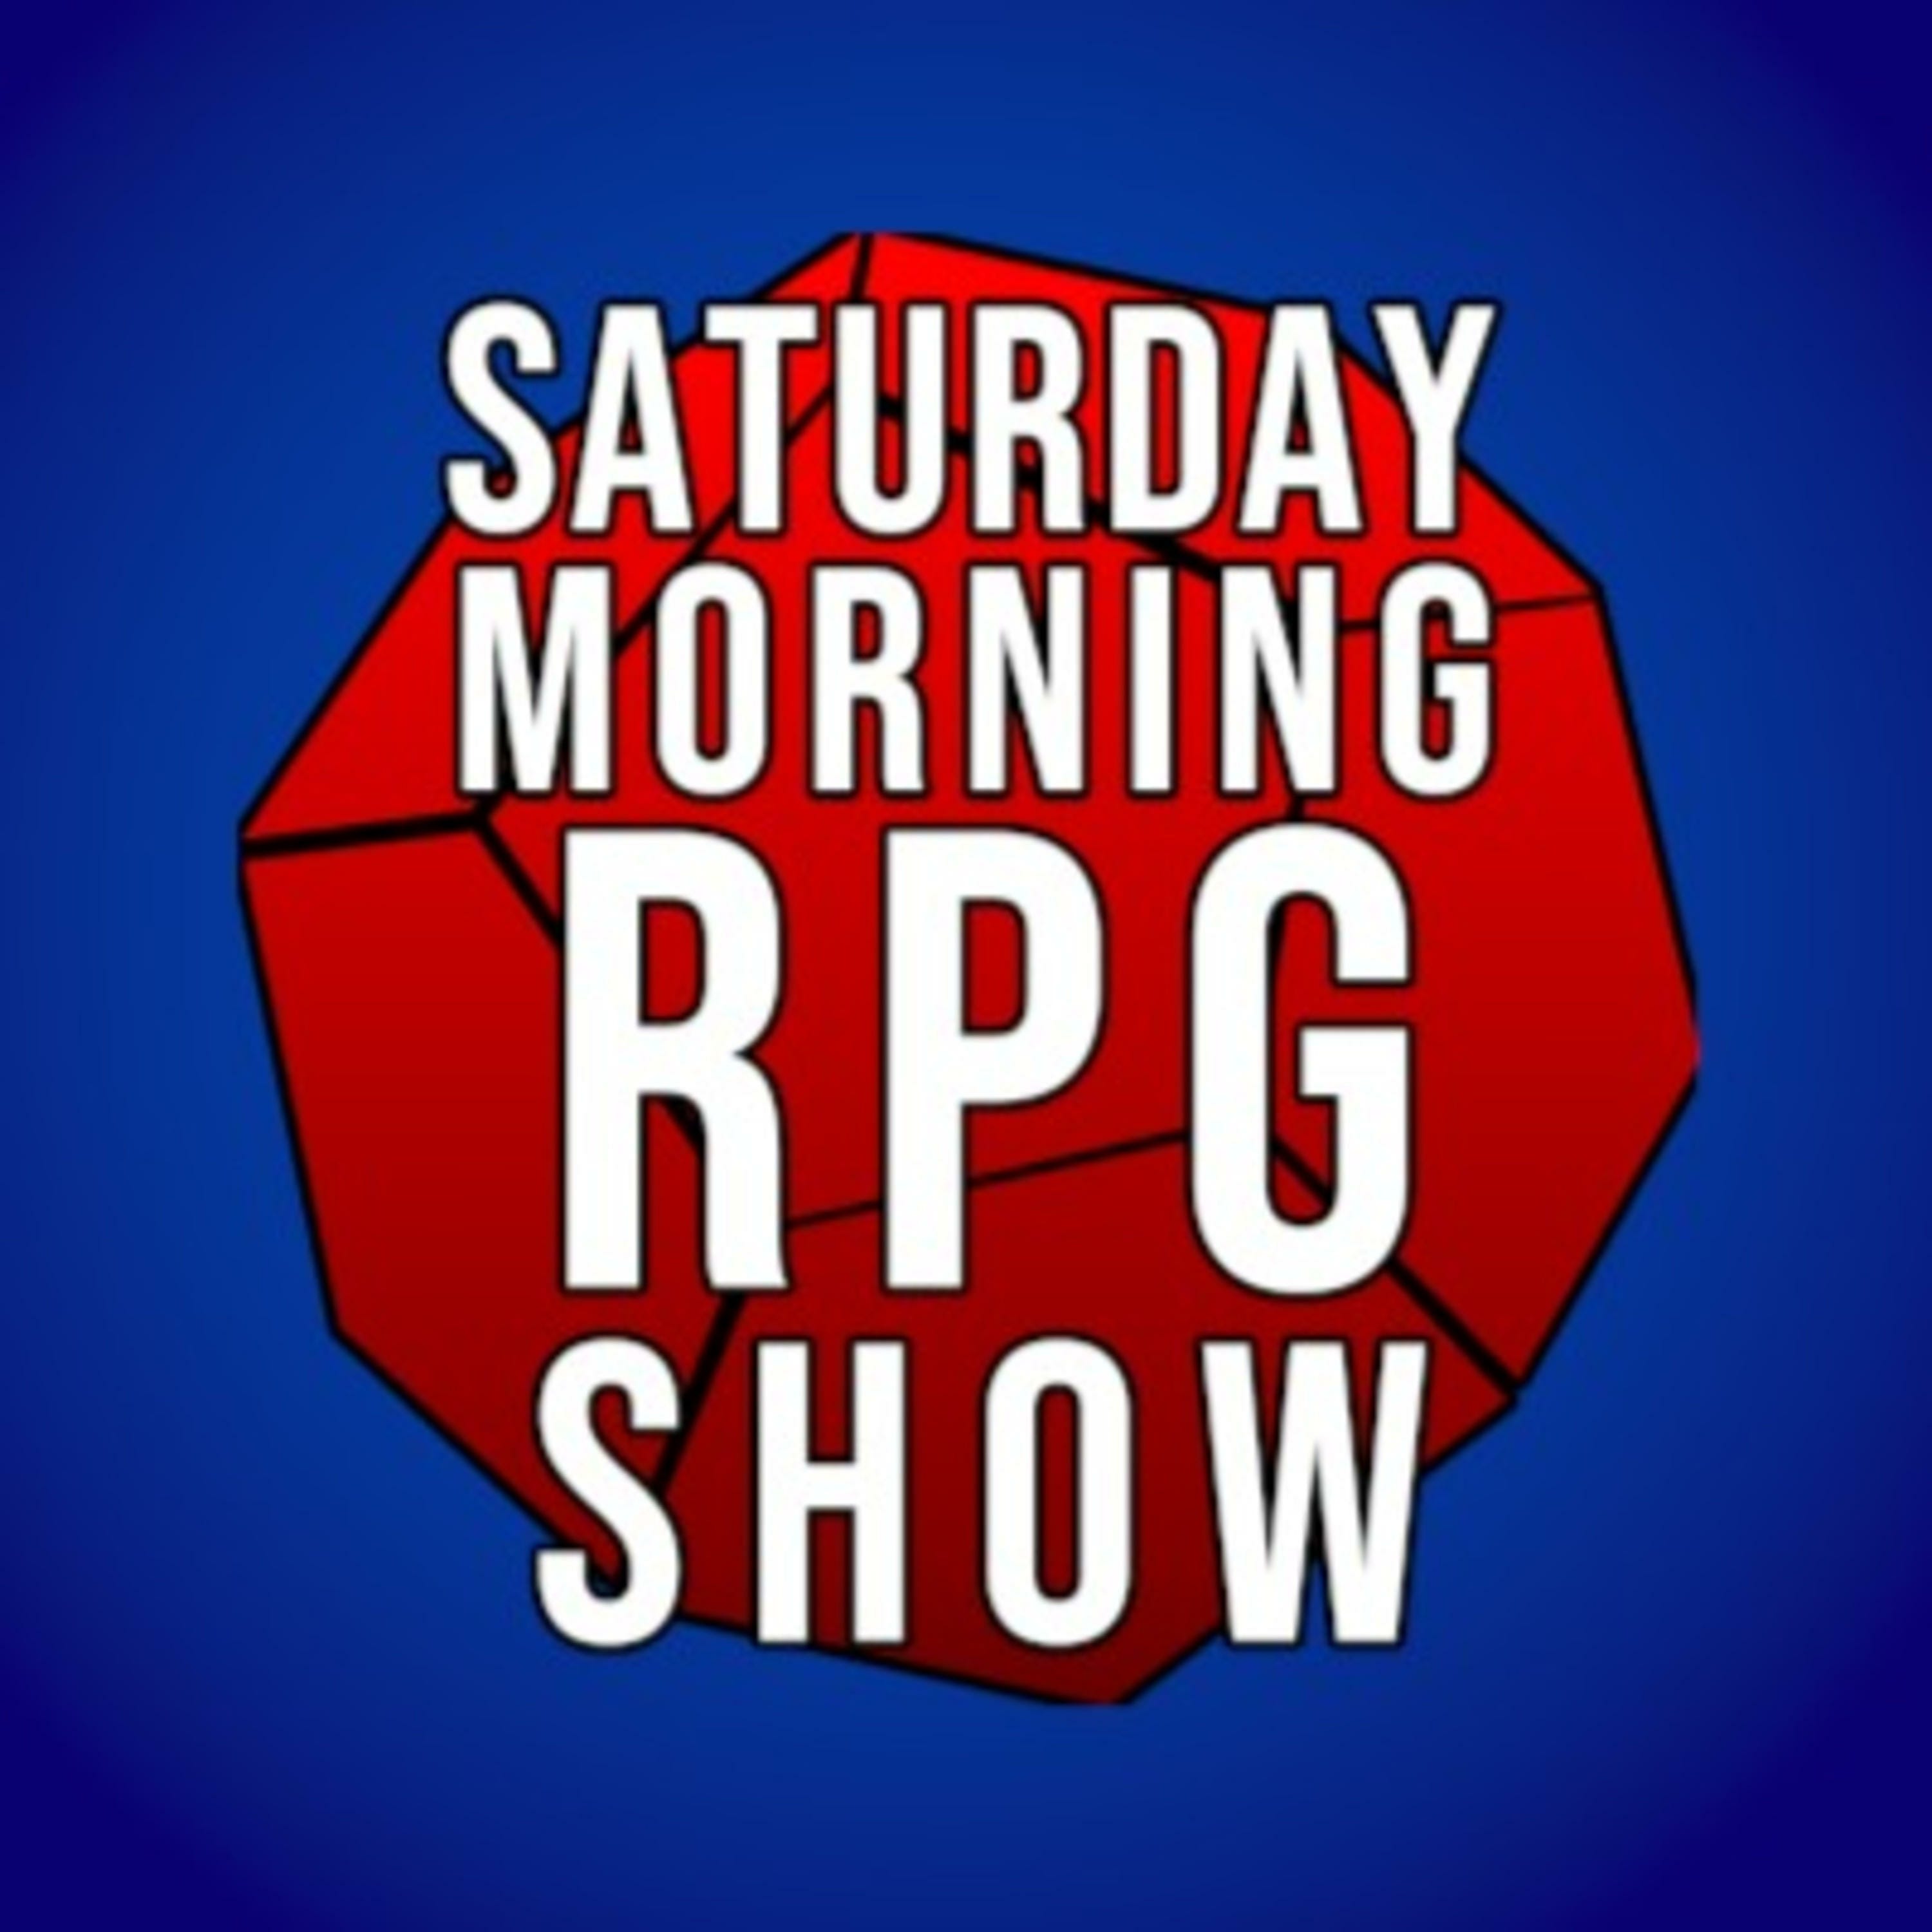 Ep 17 - SMDnDShow - Roleplaying Woes